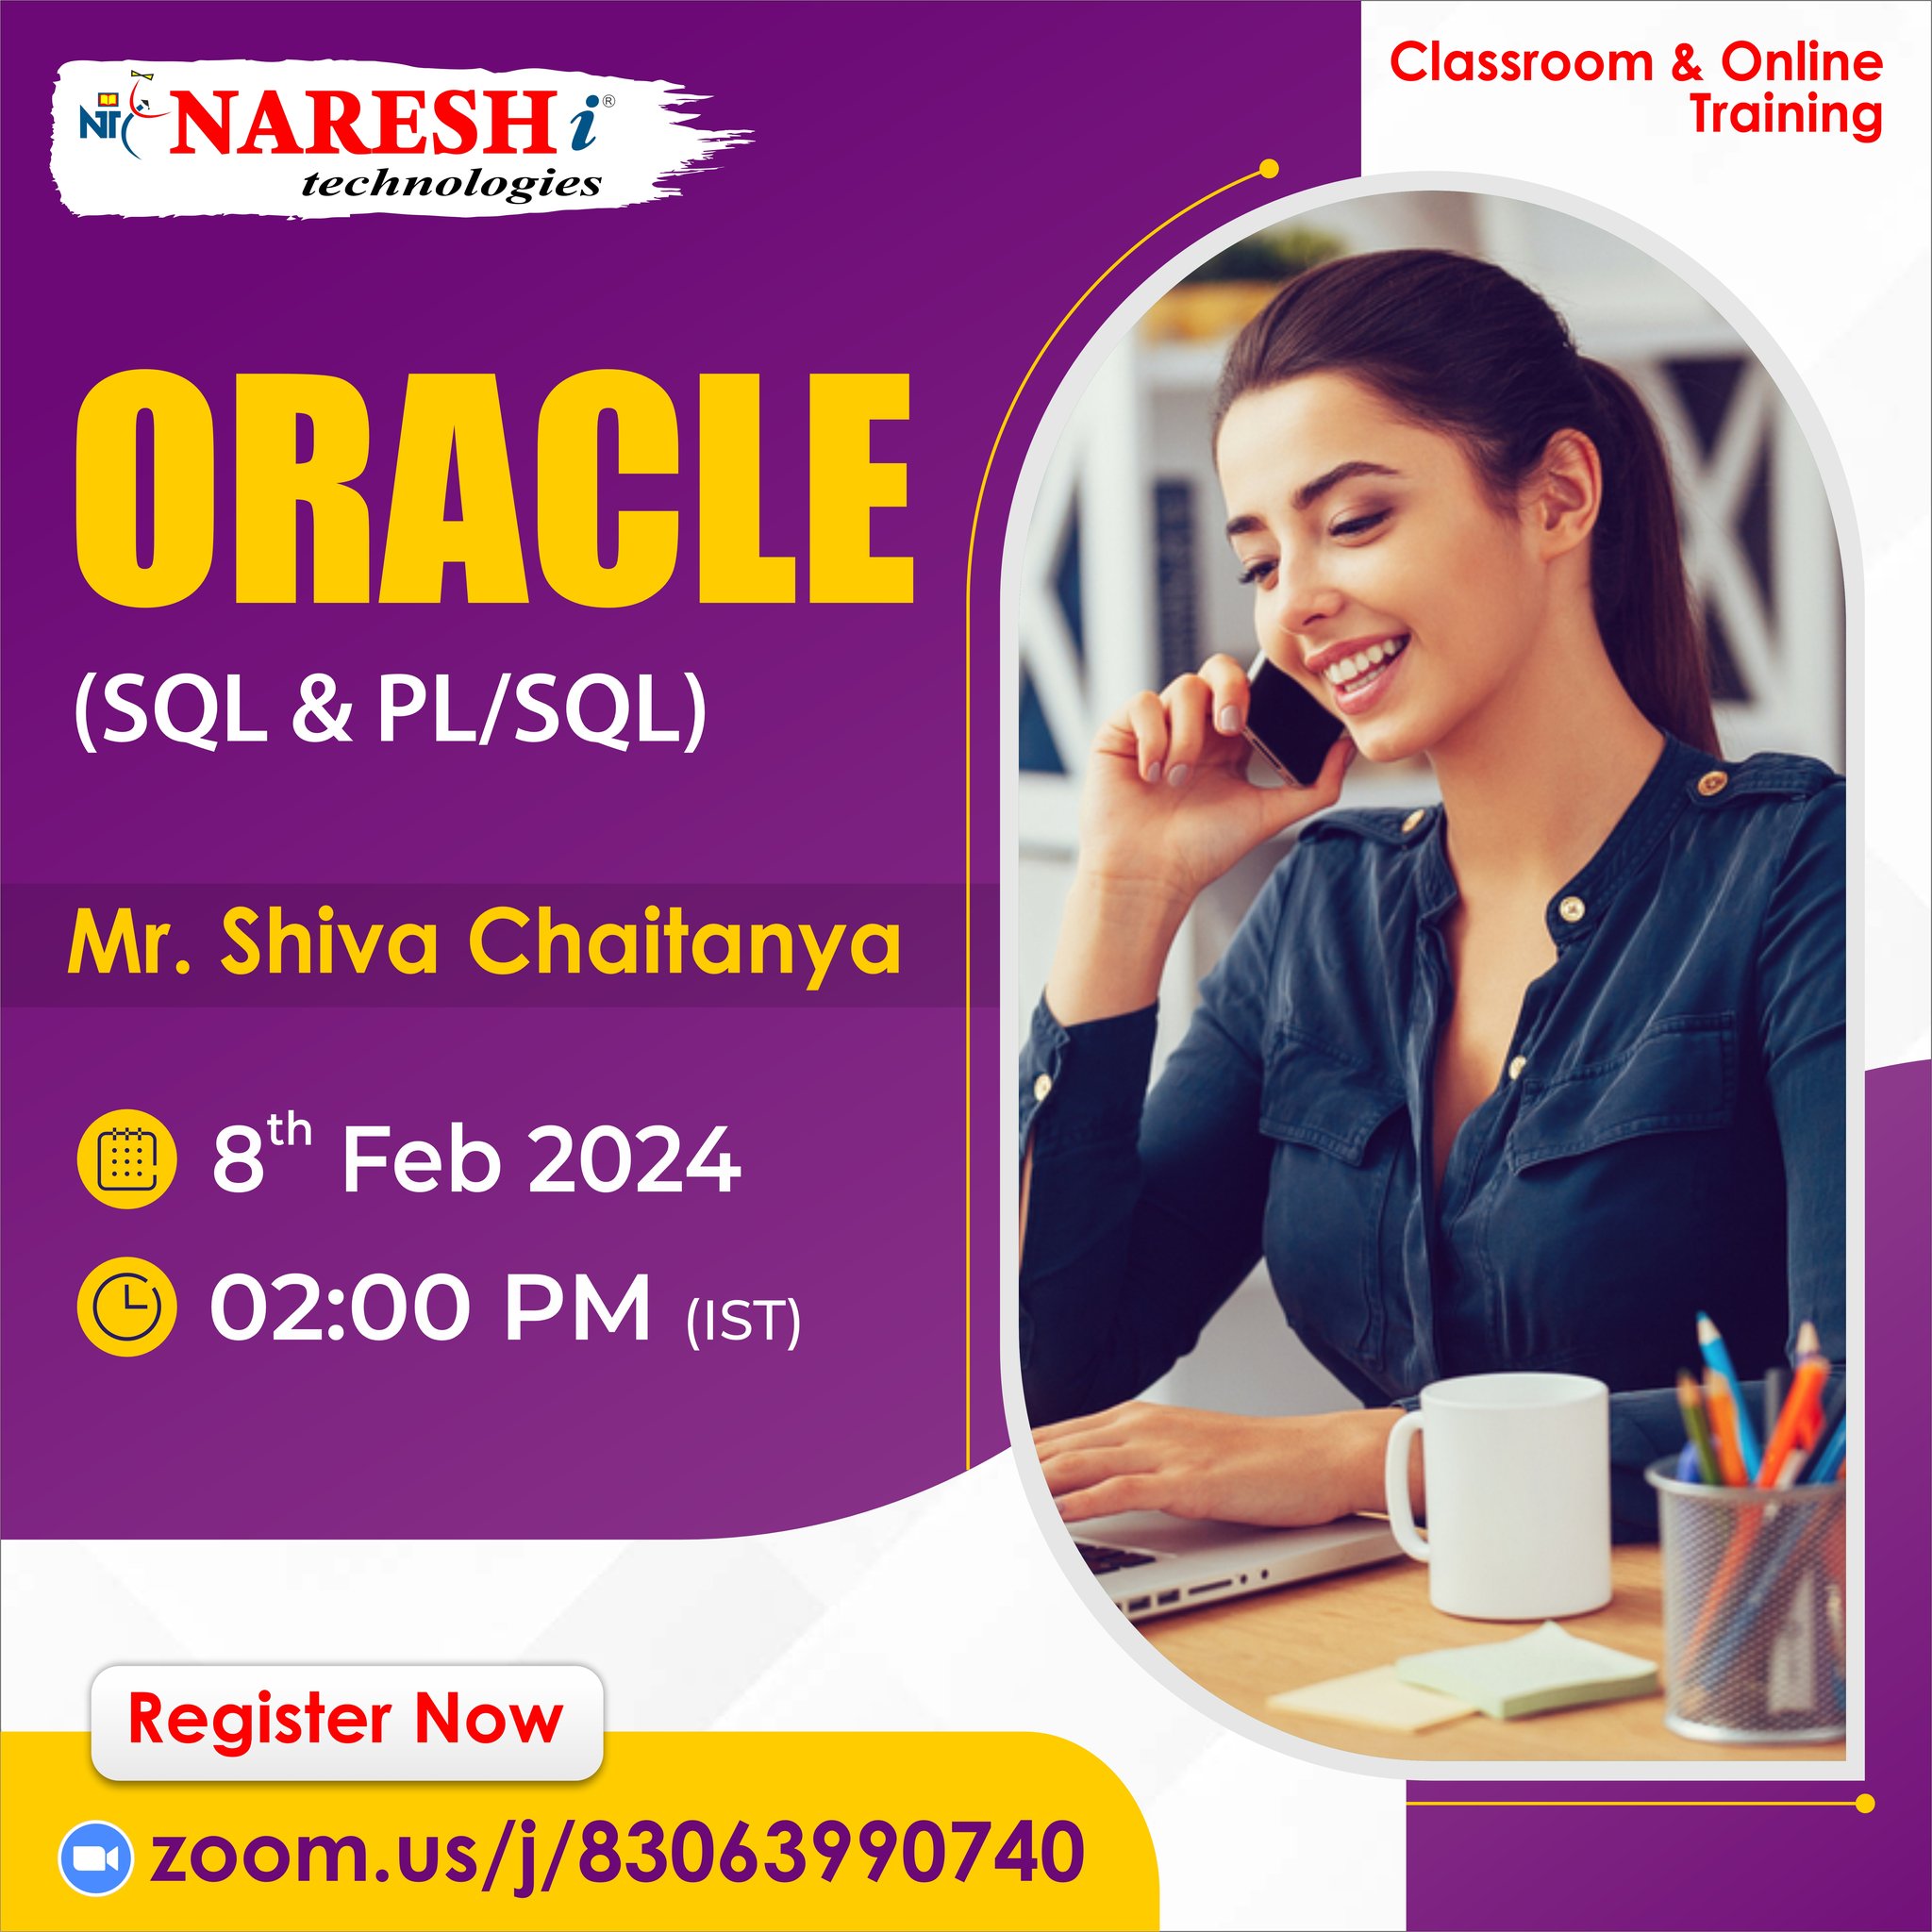 Best Training ORACLE Online Course in Hyderabad - NareshIT, Online Event